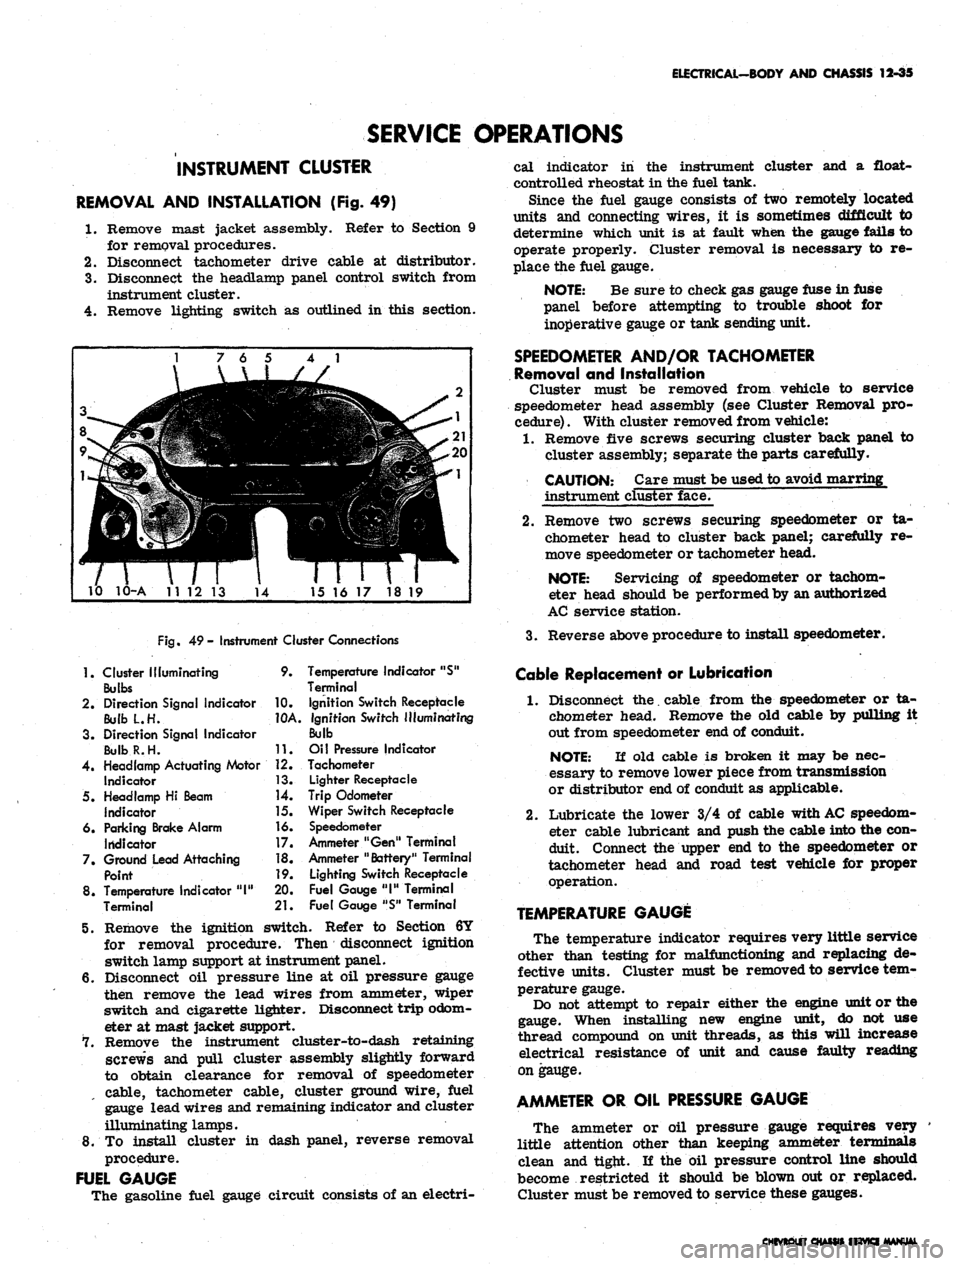 CHEVROLET CAMARO 1967 1.G Chassis User Guide 
ELECTRICAL-BODY AND CHASSIS 12-35

SERVICE OPERATIONS

INSTRUMENT CLUSTER

REMOVAL AND INSTALLATION (Fig. 49)

1.
 Remove mast jacket assembly. Refer to Section 9

for removal procedures.

2.
 Discon